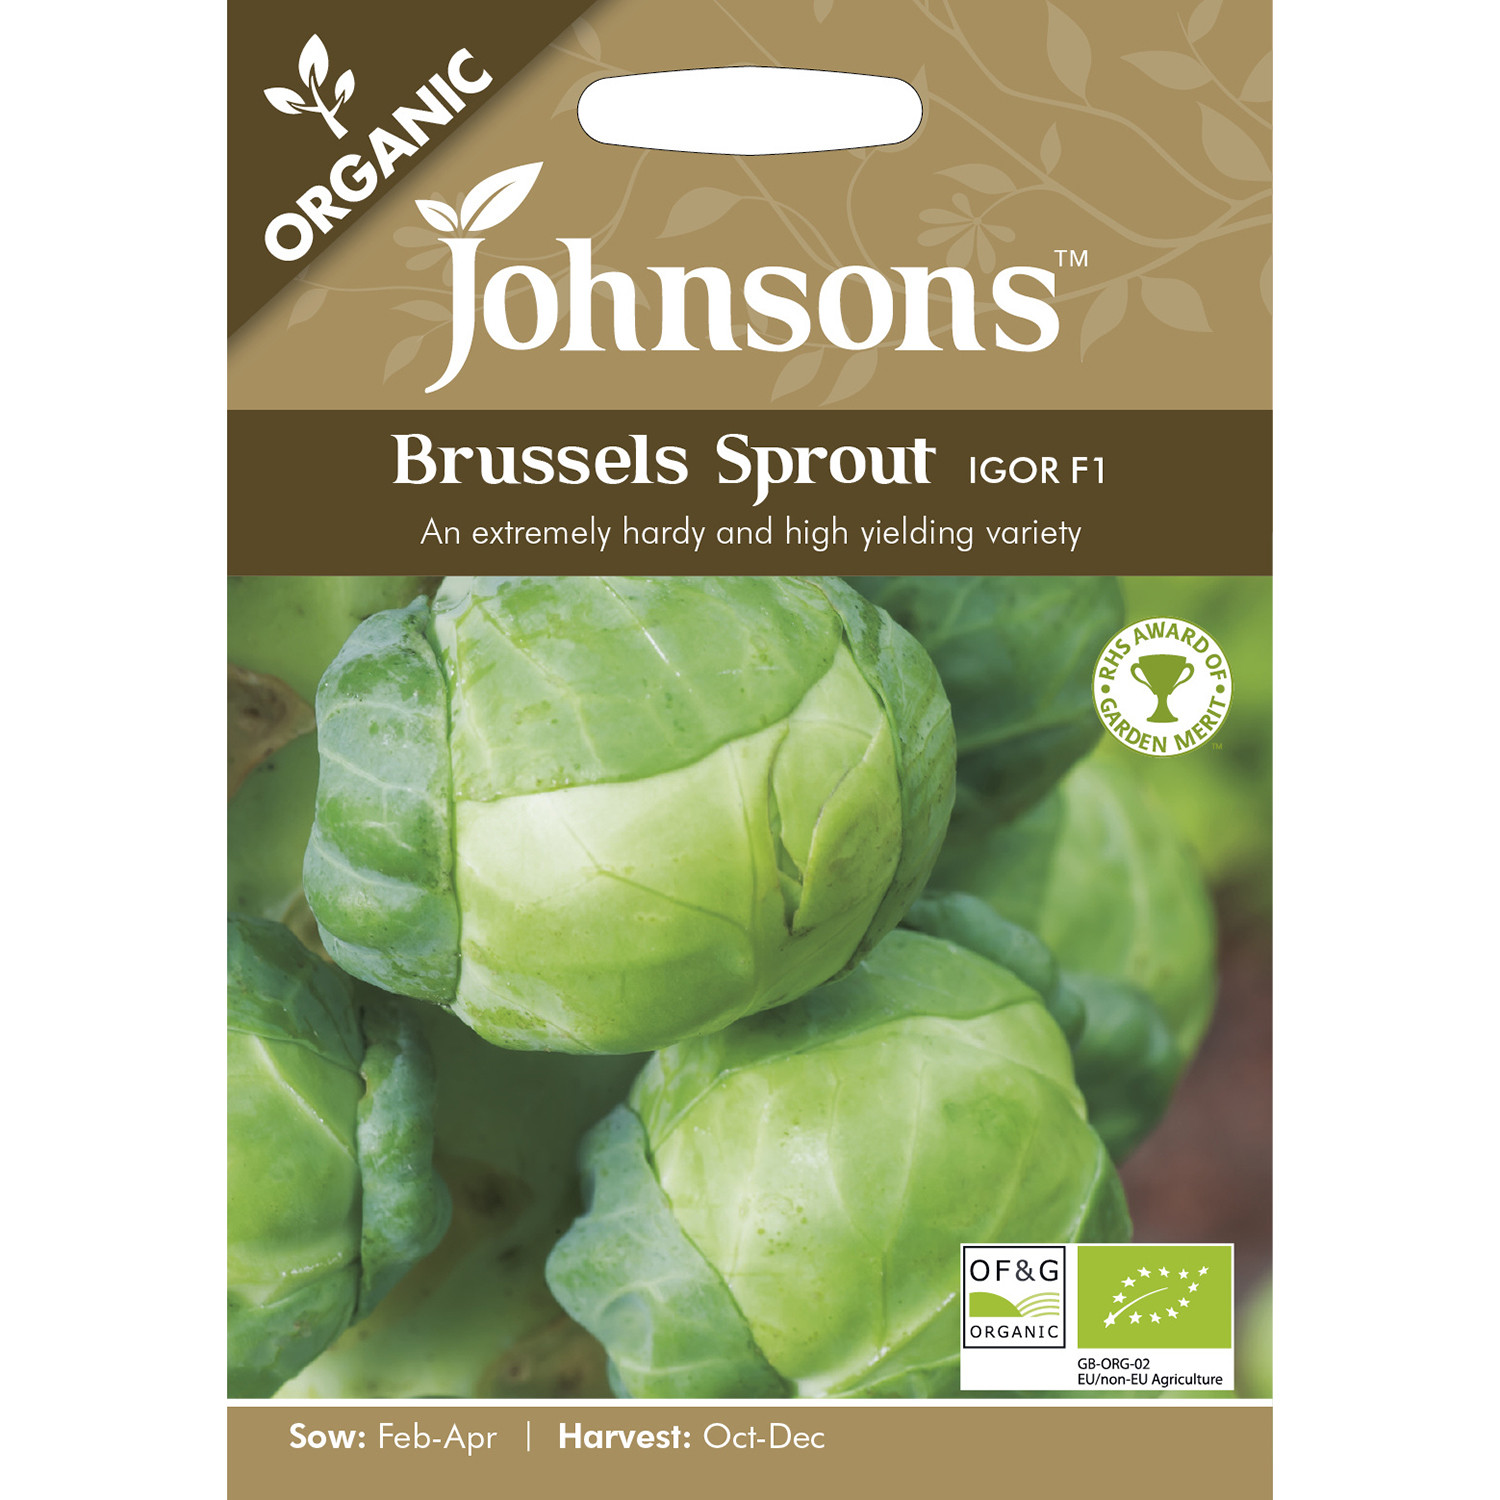 Johnsons Organic Igor F1 Brussels Sprout Seeds Image 2